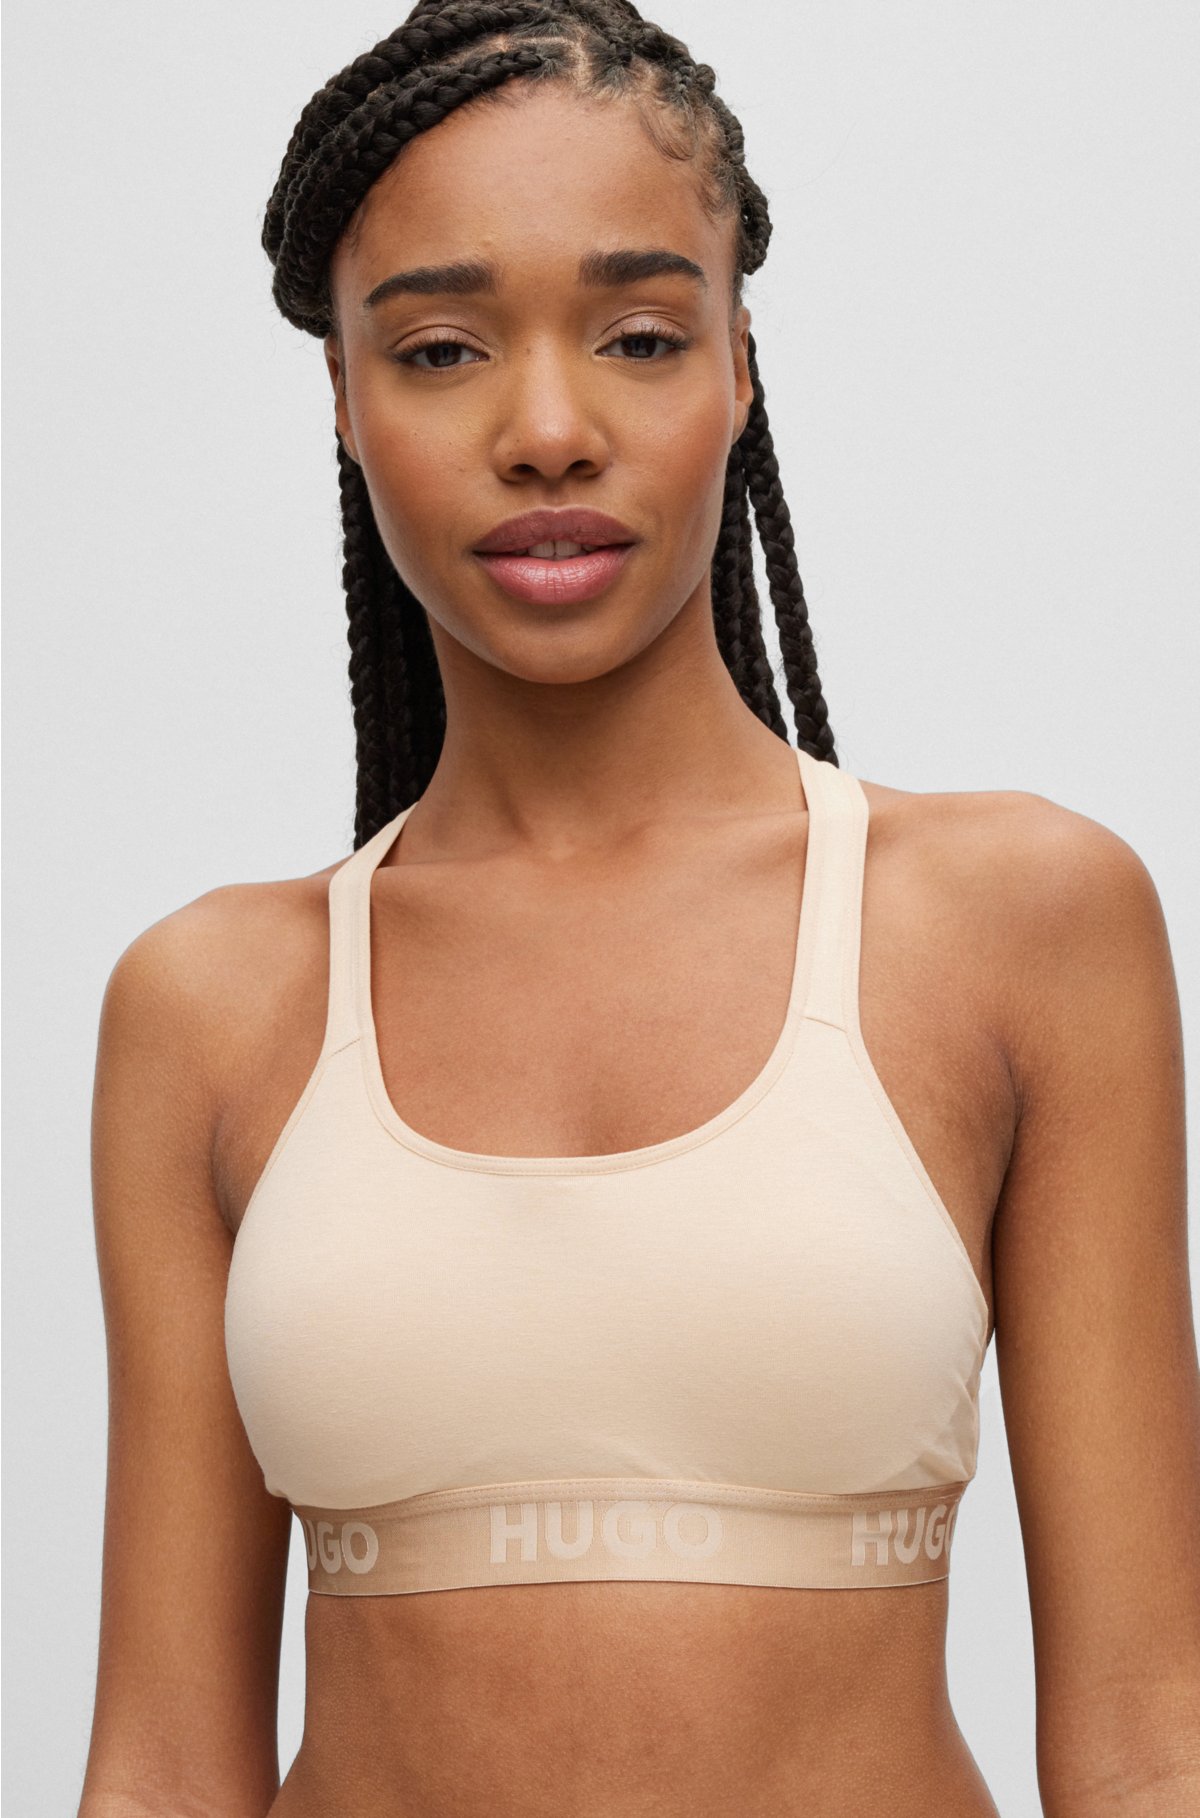 with - HUGO logos Bralette repeat cotton stretch in